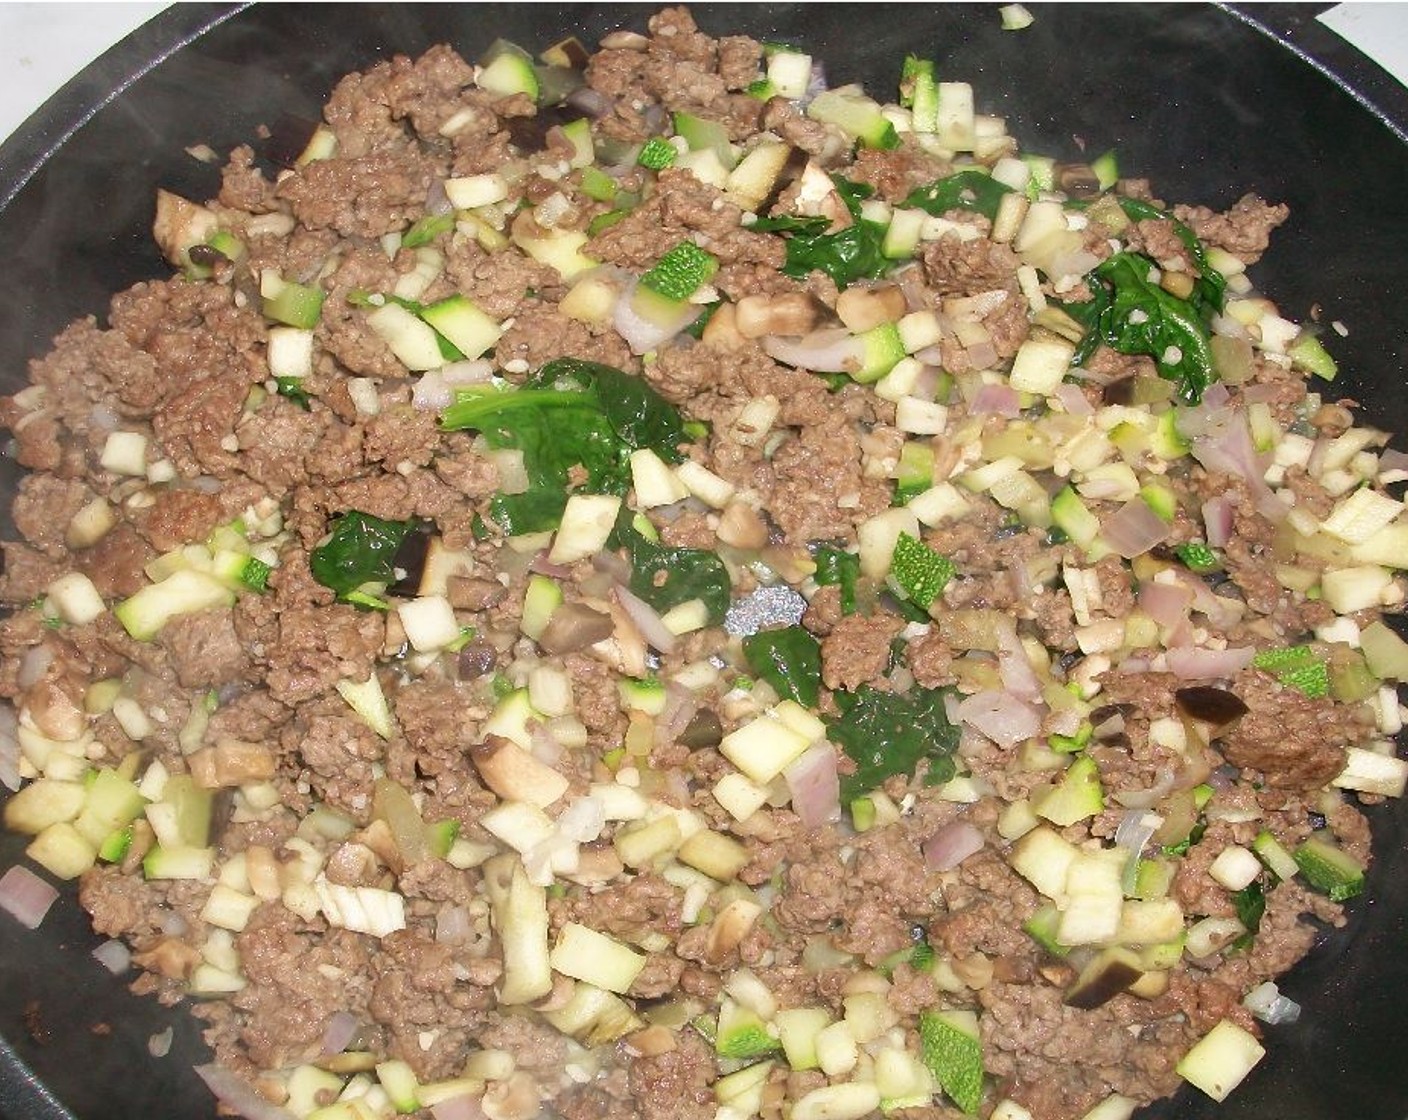 step 2 Brown the Ground Bison (8 oz). Add Zucchini (1/4), Eggplant (1), Onion (1/4), Mushrooms (2), Garlic (1 Tbsp), and Spinach Leaves (1 handful) to the bison. Add the Pasta Sauce (2 1/3 cups) to the mix and cook on medium-low.